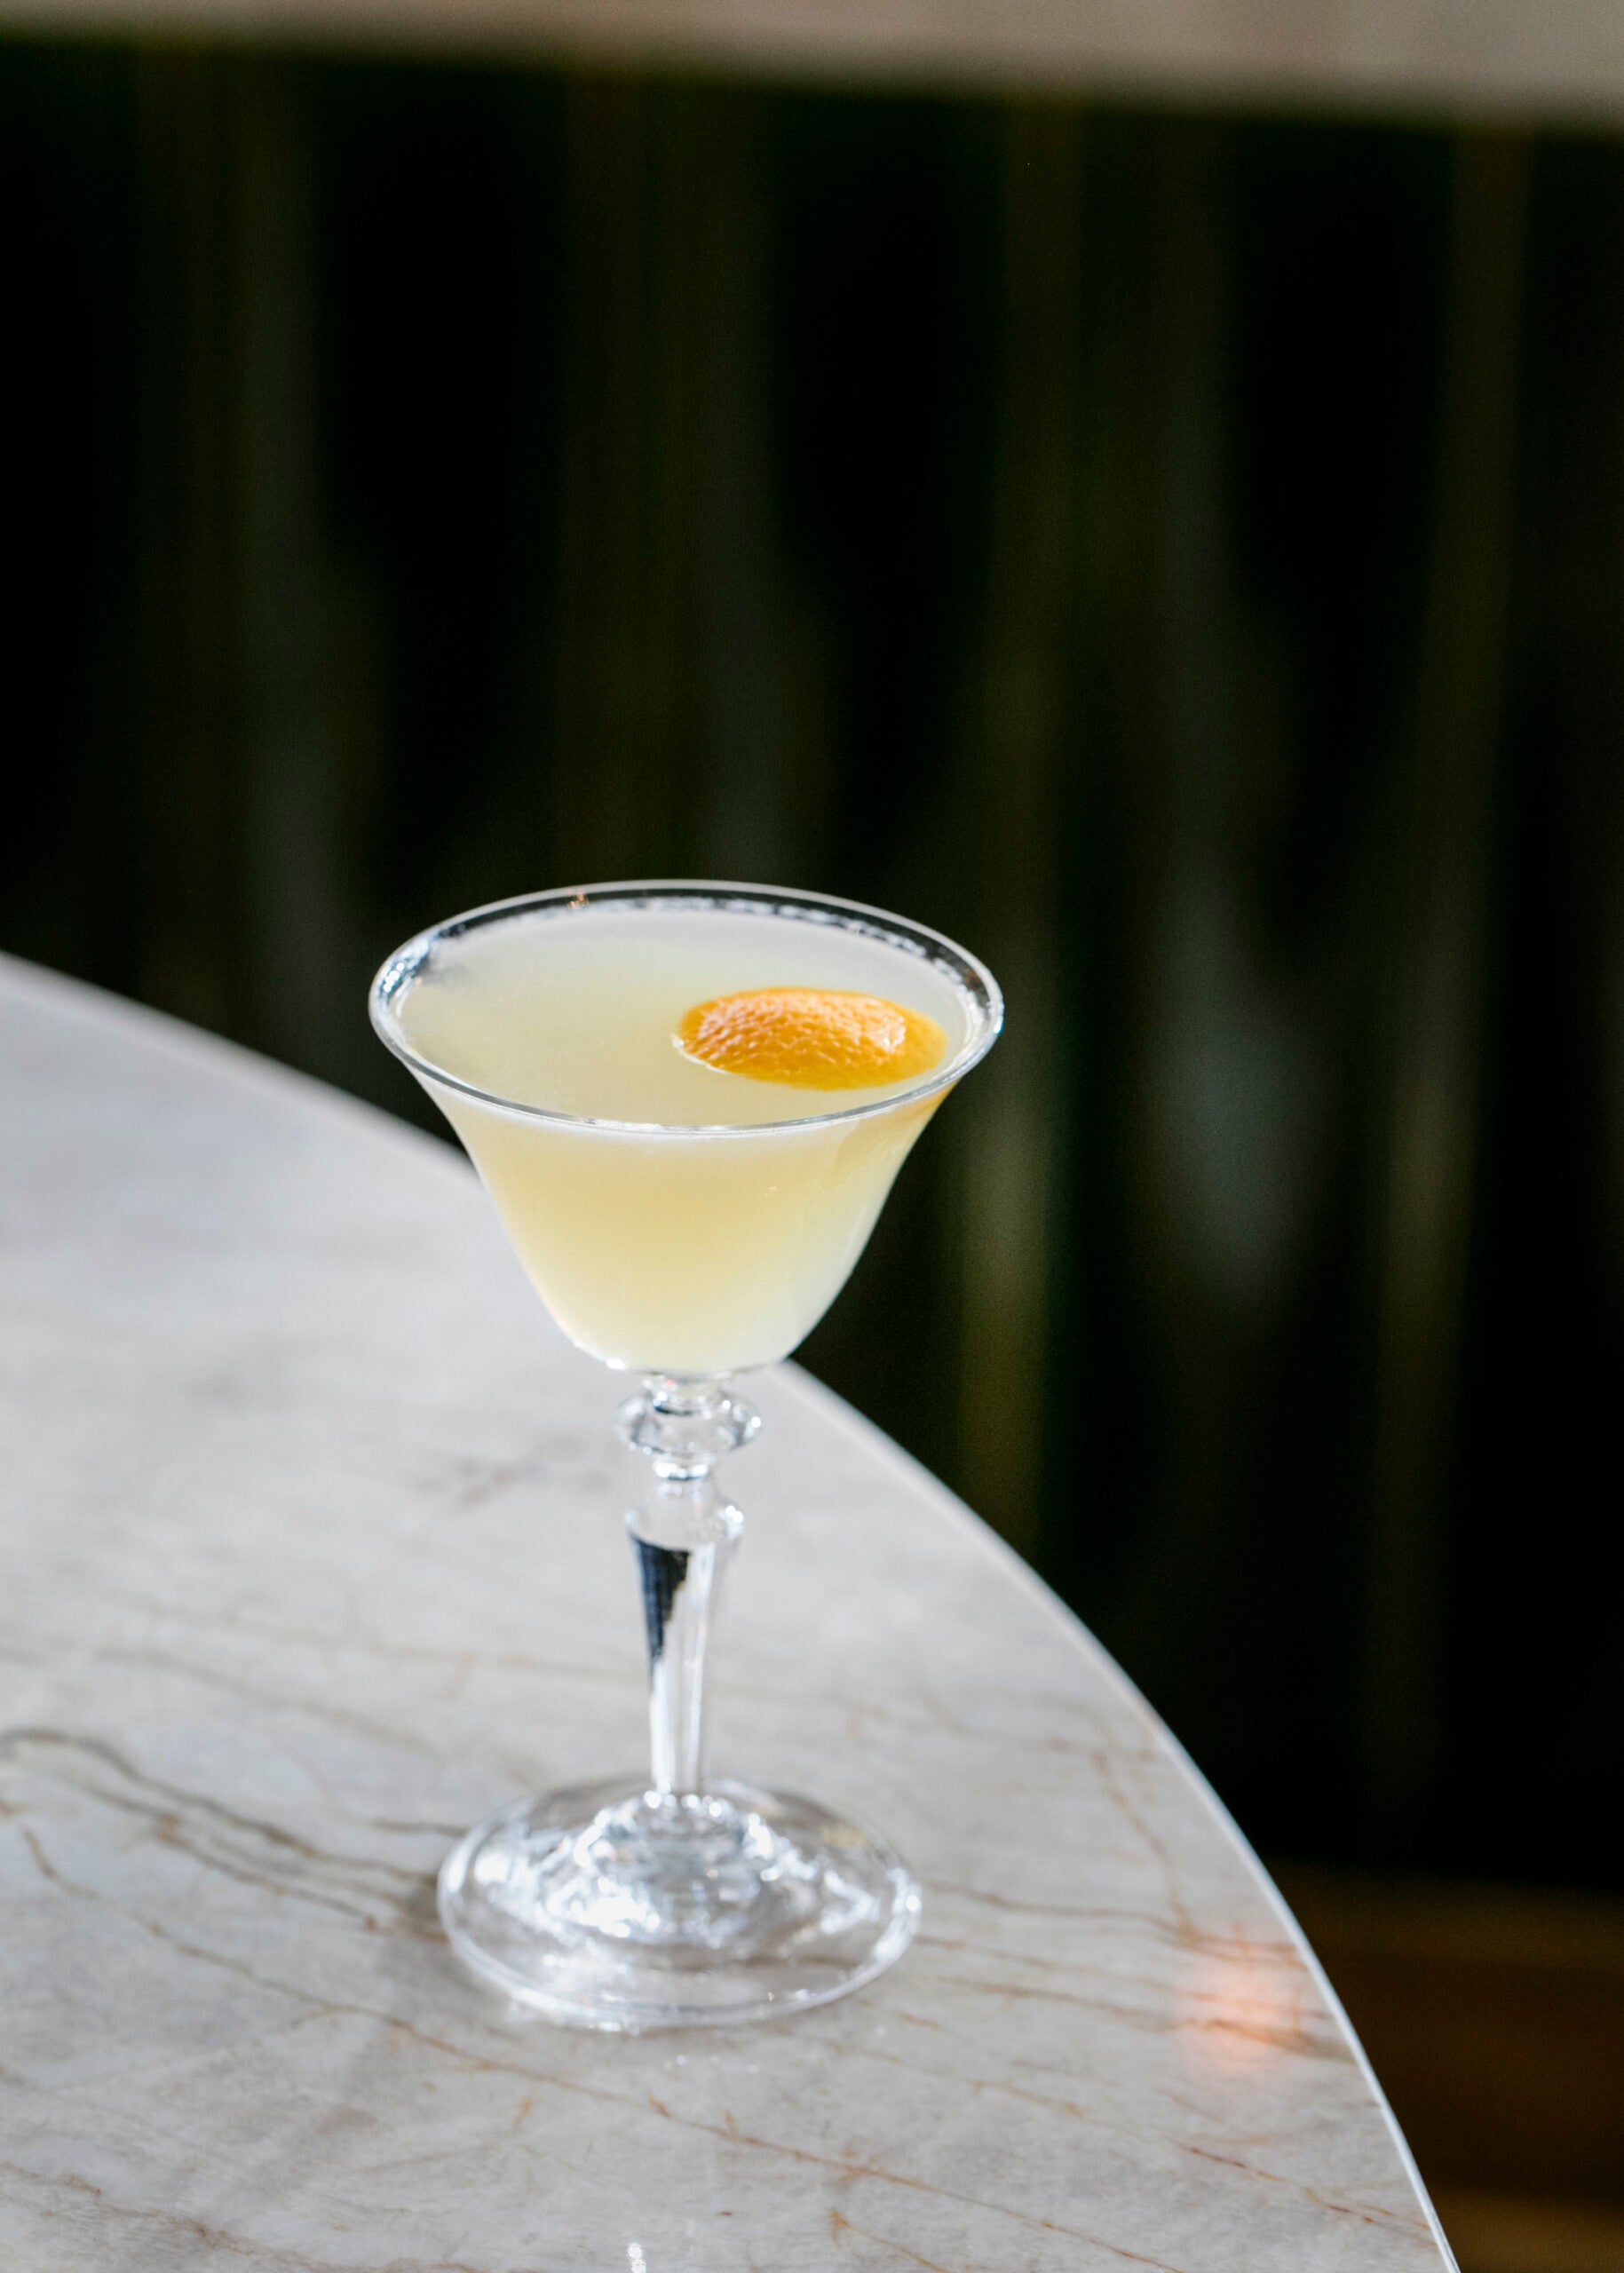 Corpse Reviver cocktail with lemon slice.